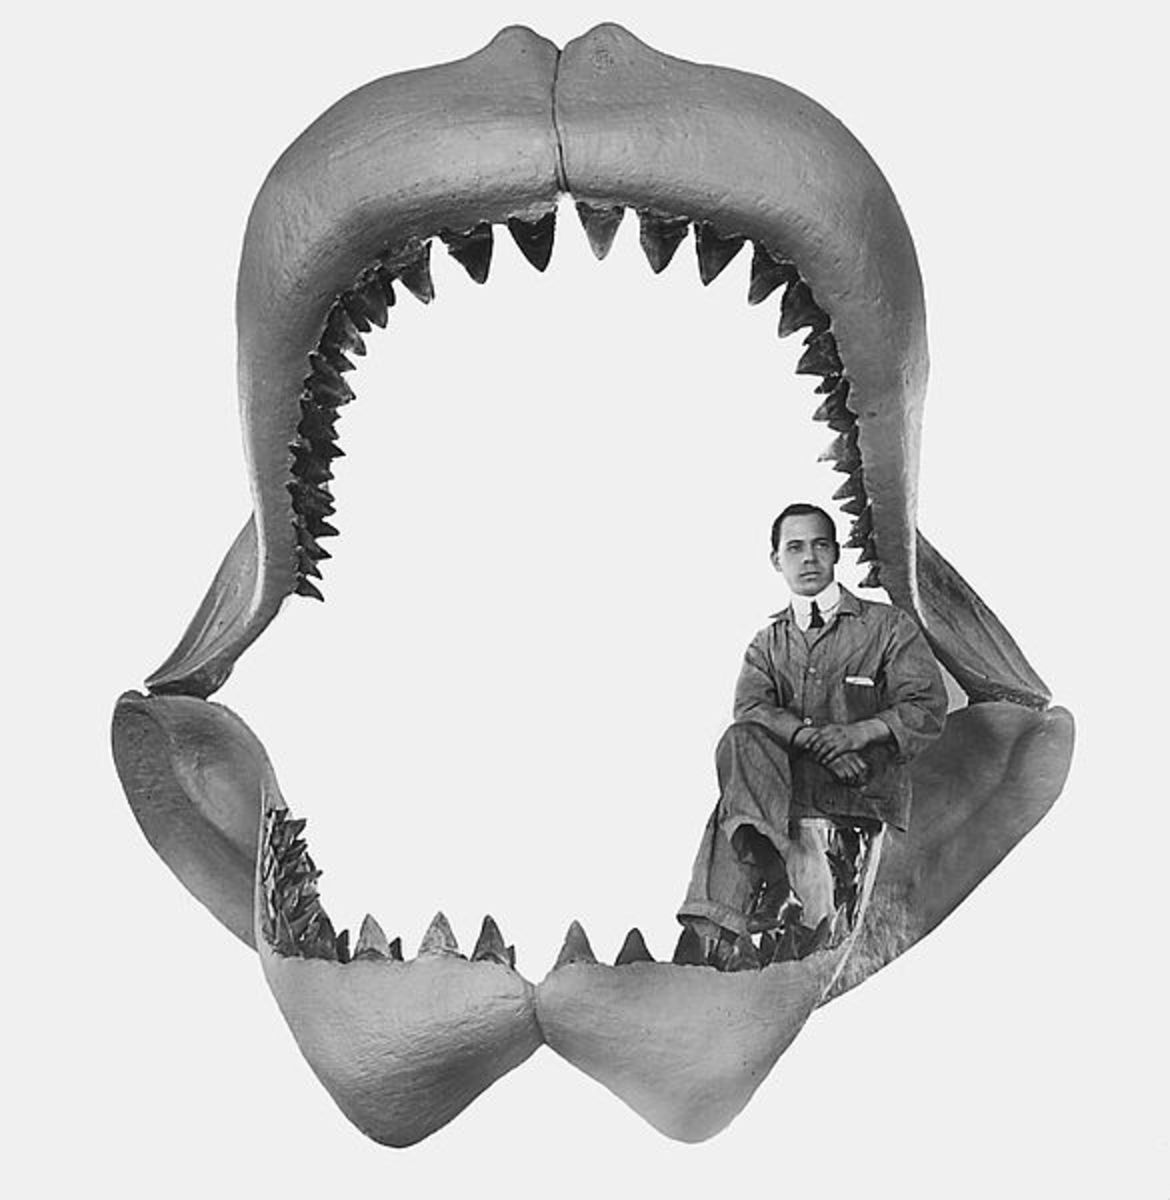 Discover interesting facts about Megalodon, the biggest shark that ever lived!